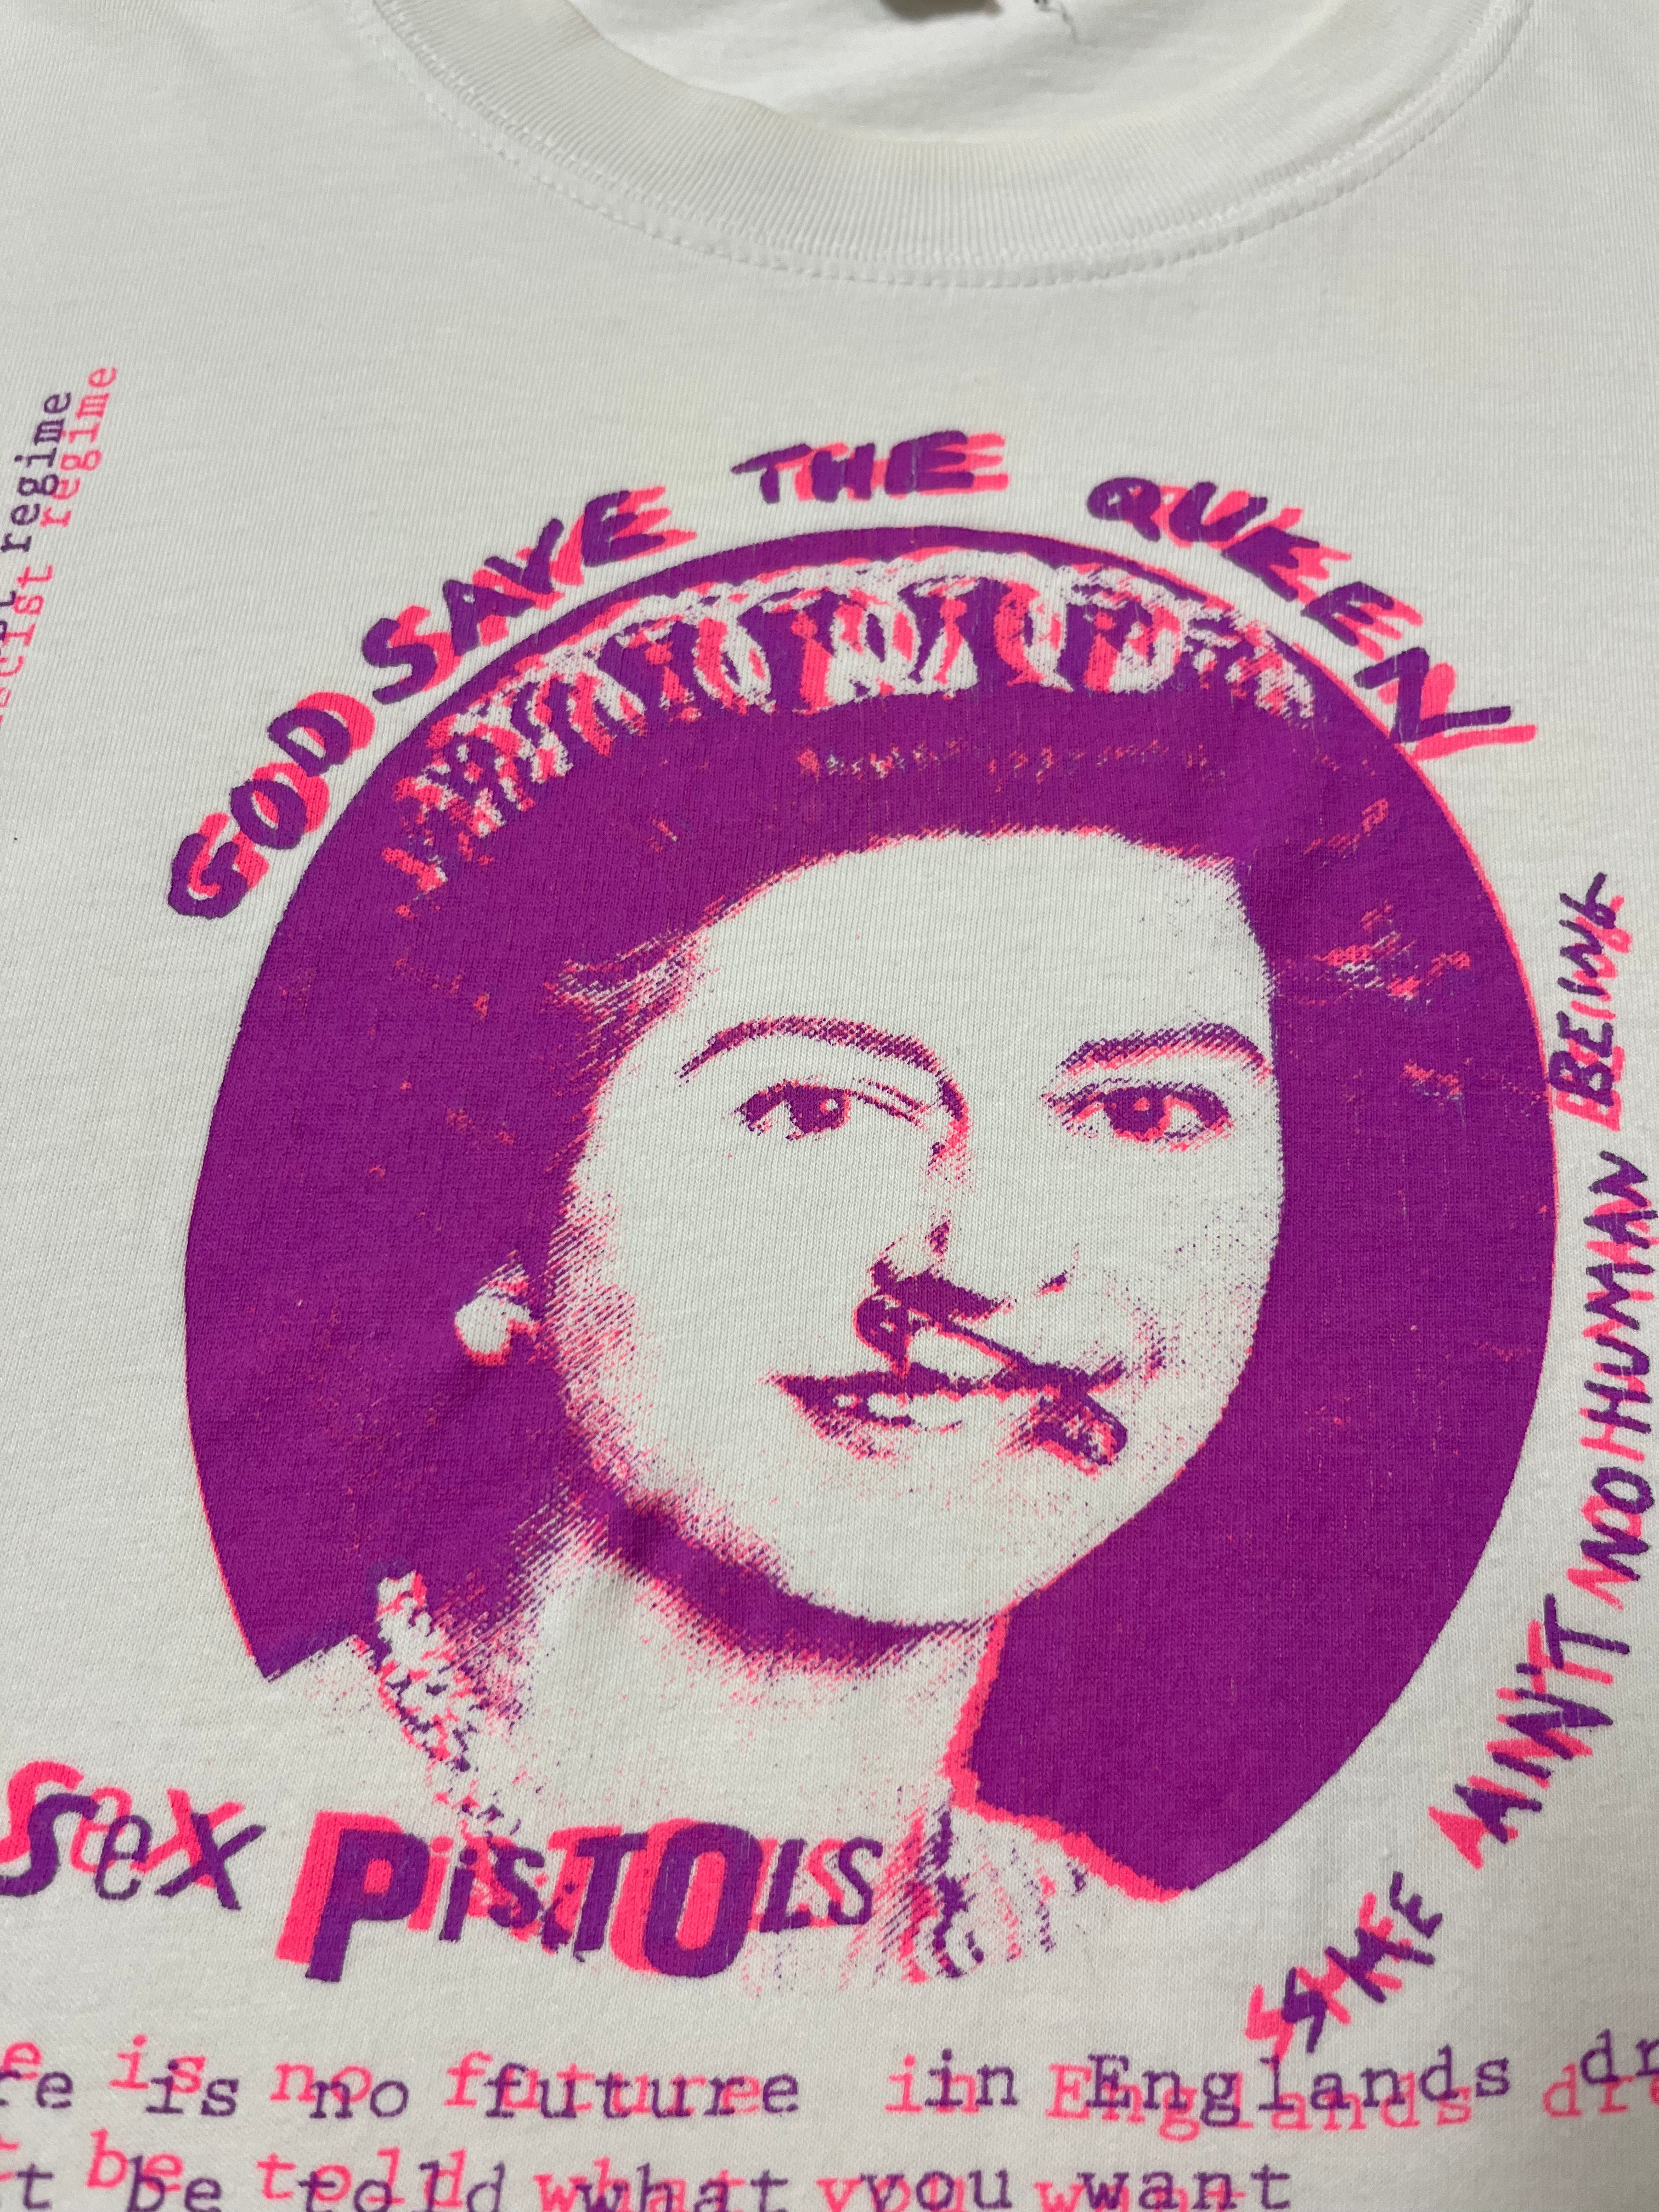 1980s Sex Pistols ‘God Save The Queen’ Euro T-Shirt - White/Off-White - L